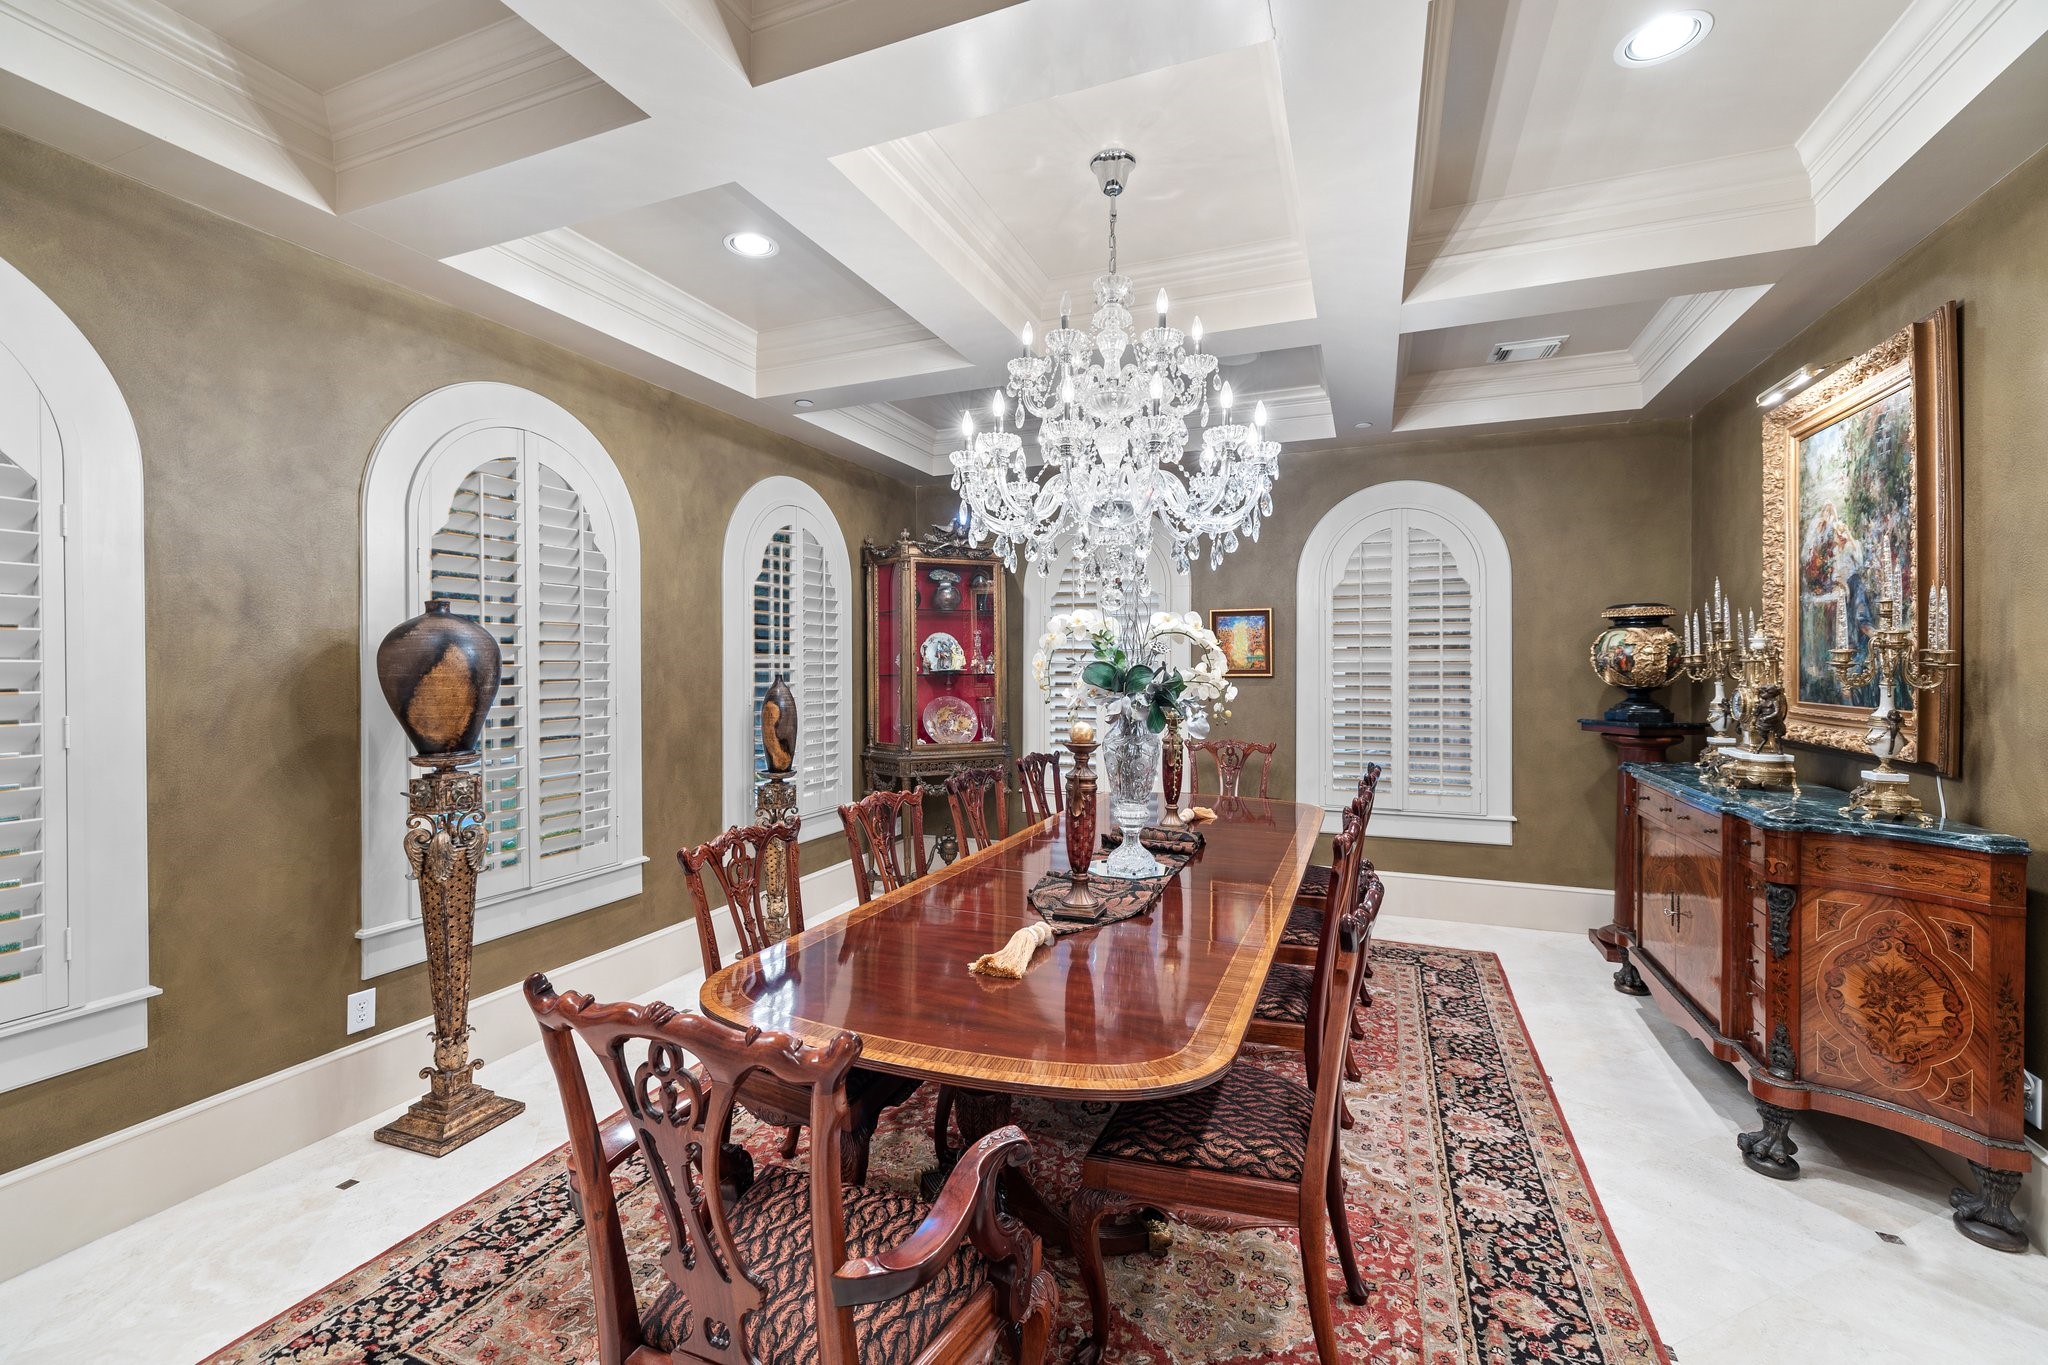 The expansive formal dining room comfortably accommodates a large dining table, perfect for hosting grand dinner parties or intimate family gatherings.